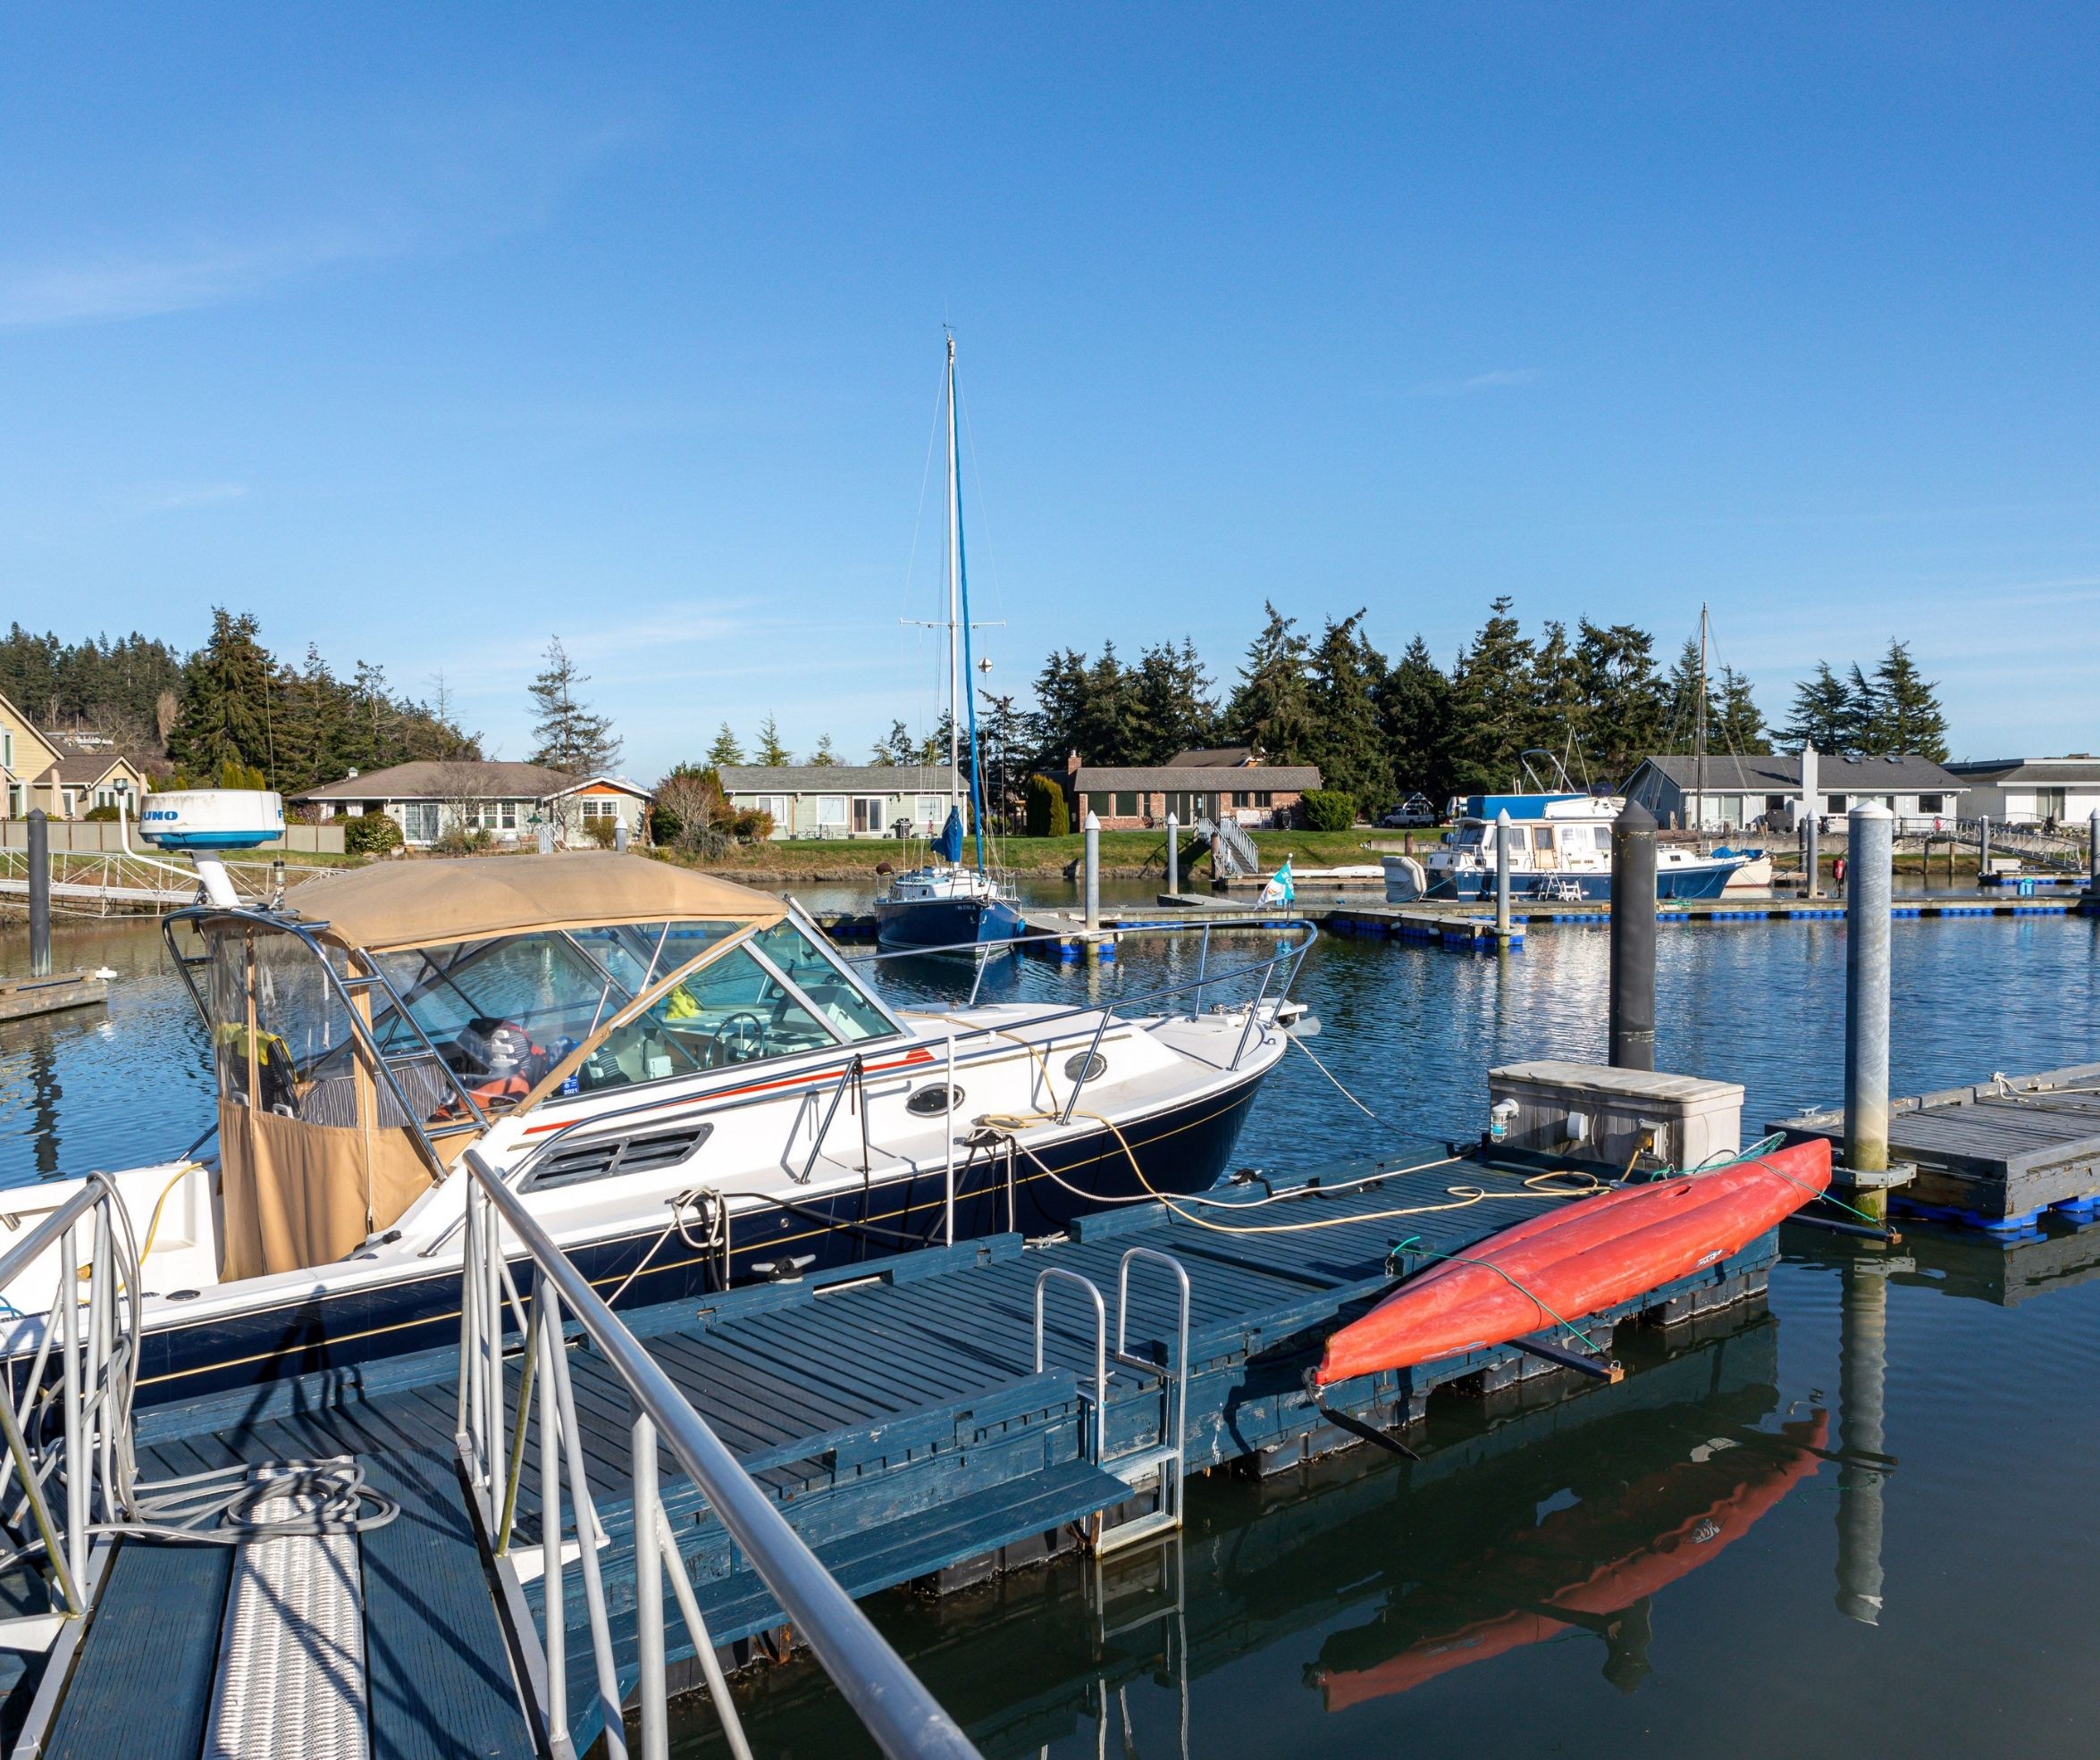 Boats docked at home, Mariners cove, sailing lifestyle, yacht, sailboats, Homes on Whidbey, Beach front, Waterfront, Mountain view